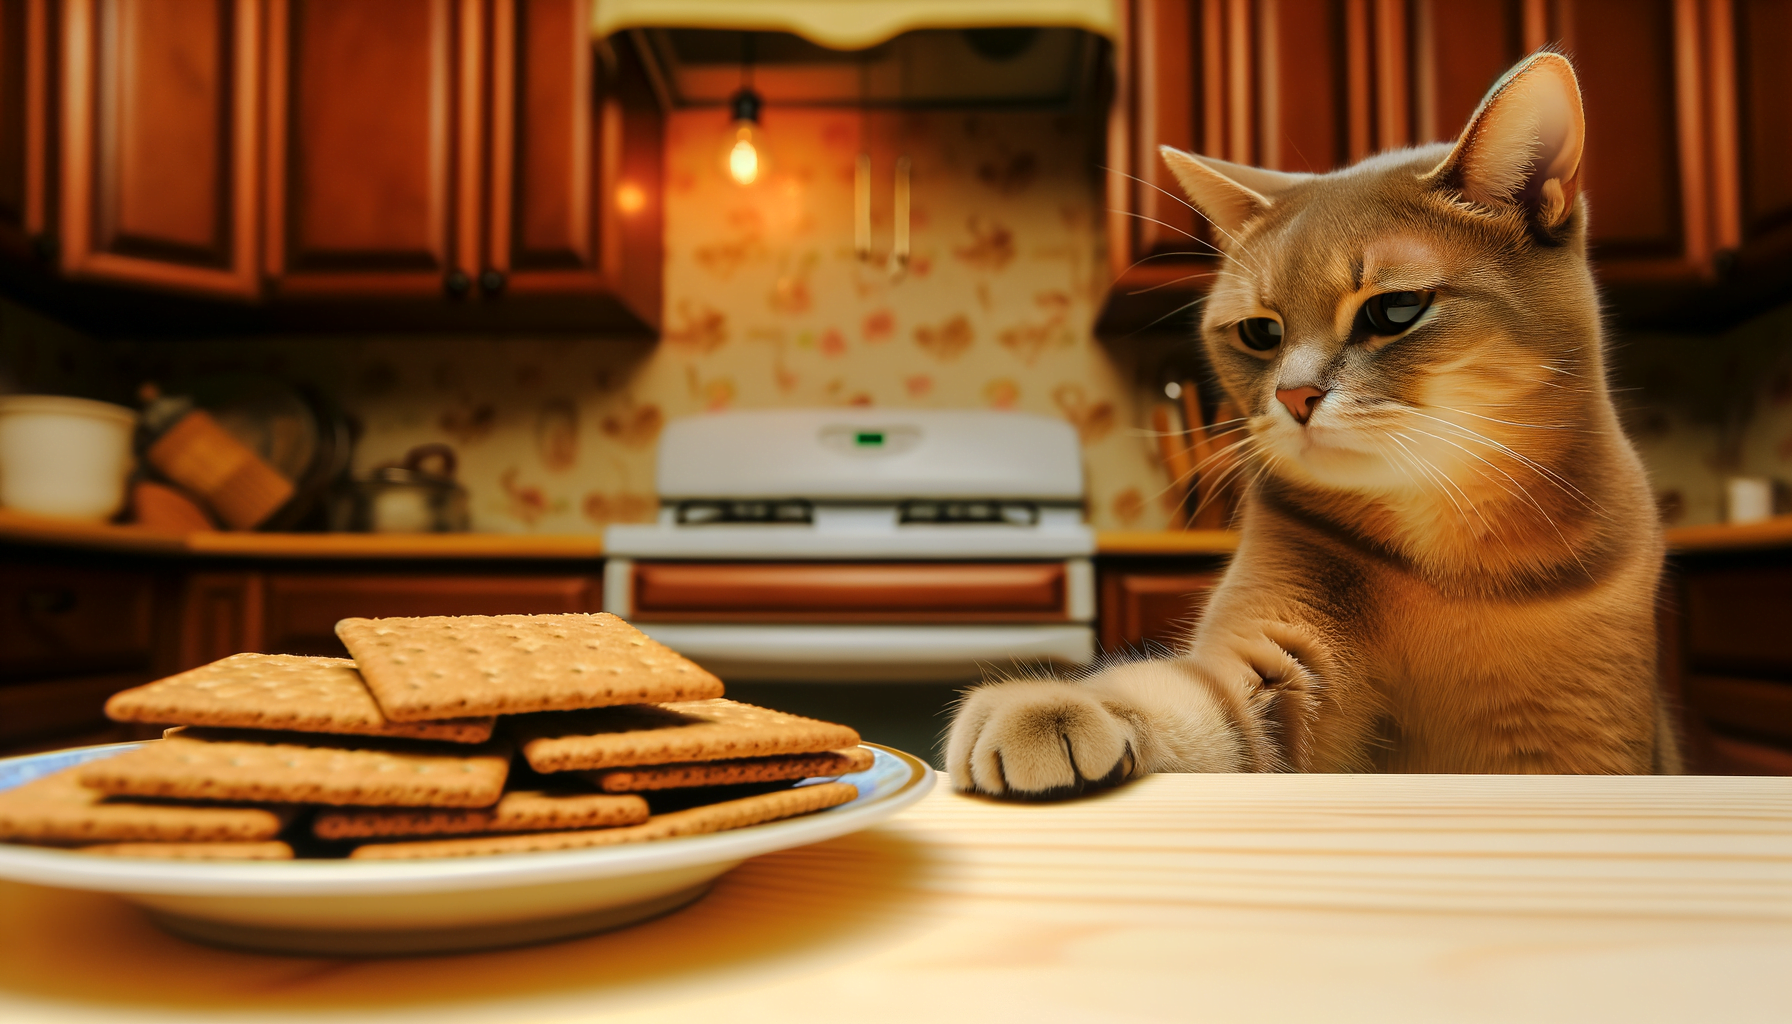 "Decoding Feline Diets: Can Cats Safely Munch on Graham Crackers?"